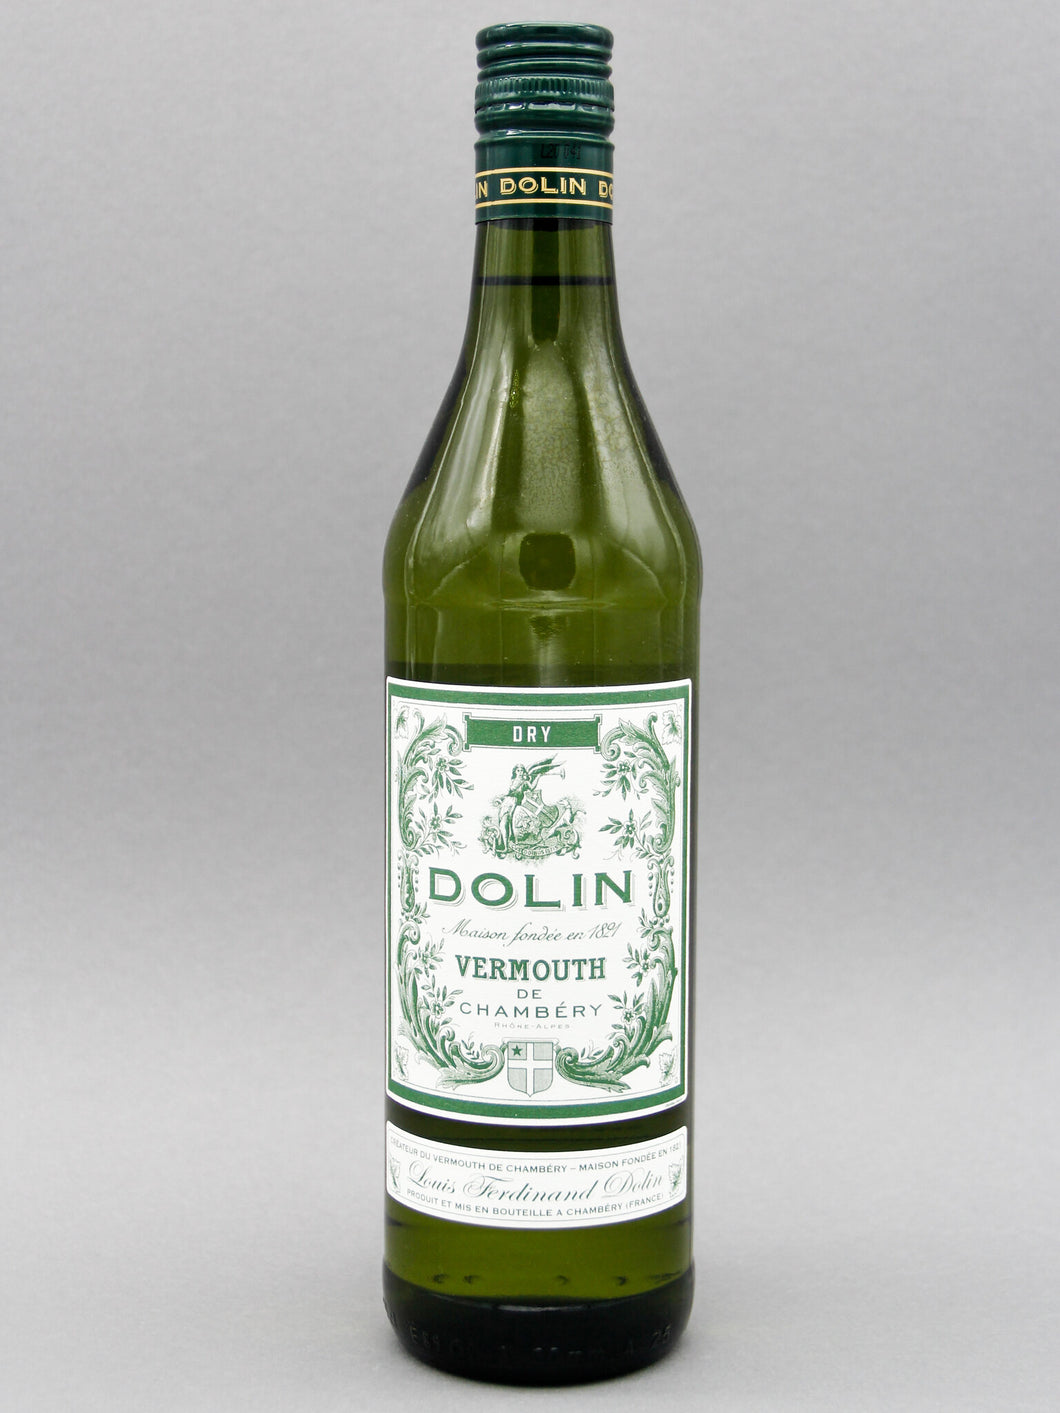 Dolin Vermouth Dry, France (17.5%, 75cl)